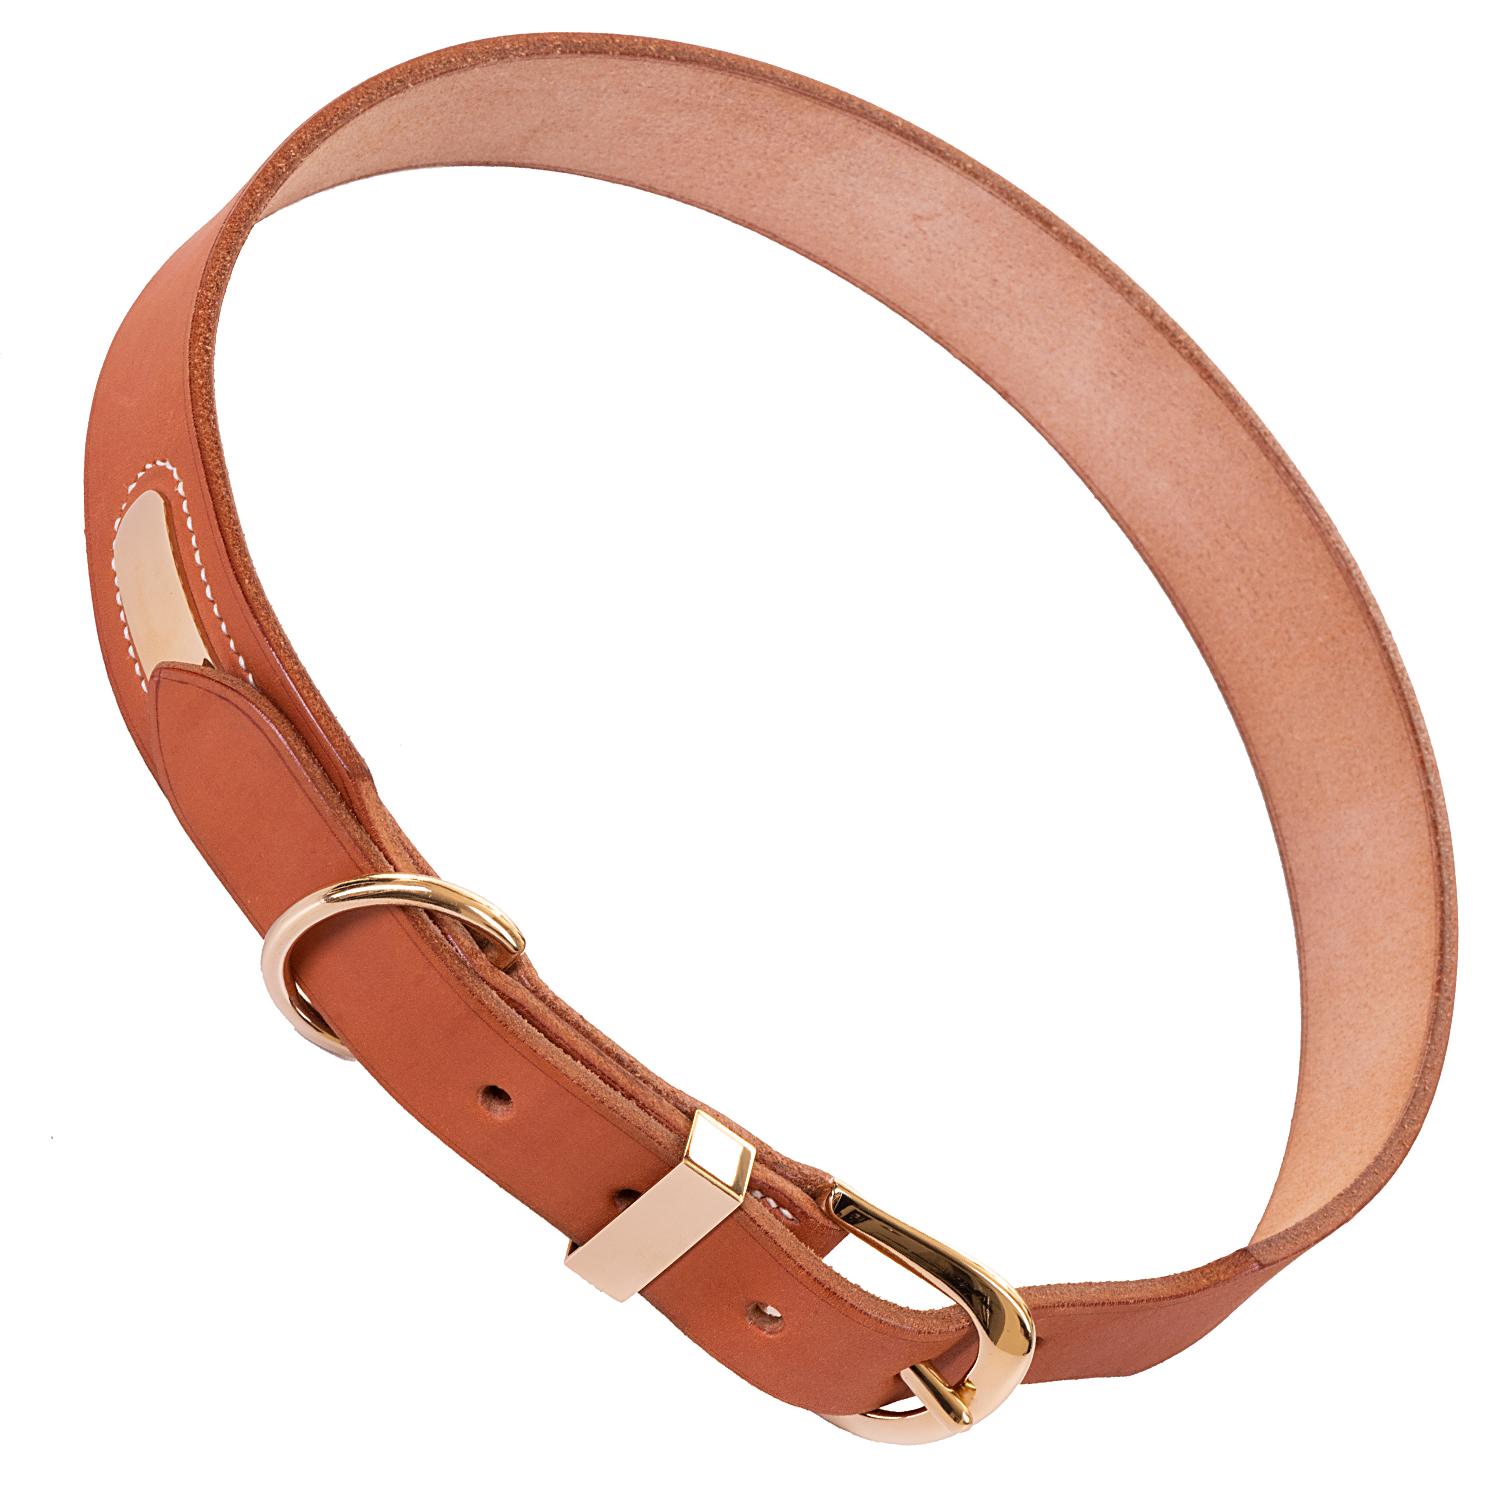 Women's or Men's Hermes 70cm Belt in Classic 'Vache Naturelle' with Gold Hardware - Never Worn For Sale